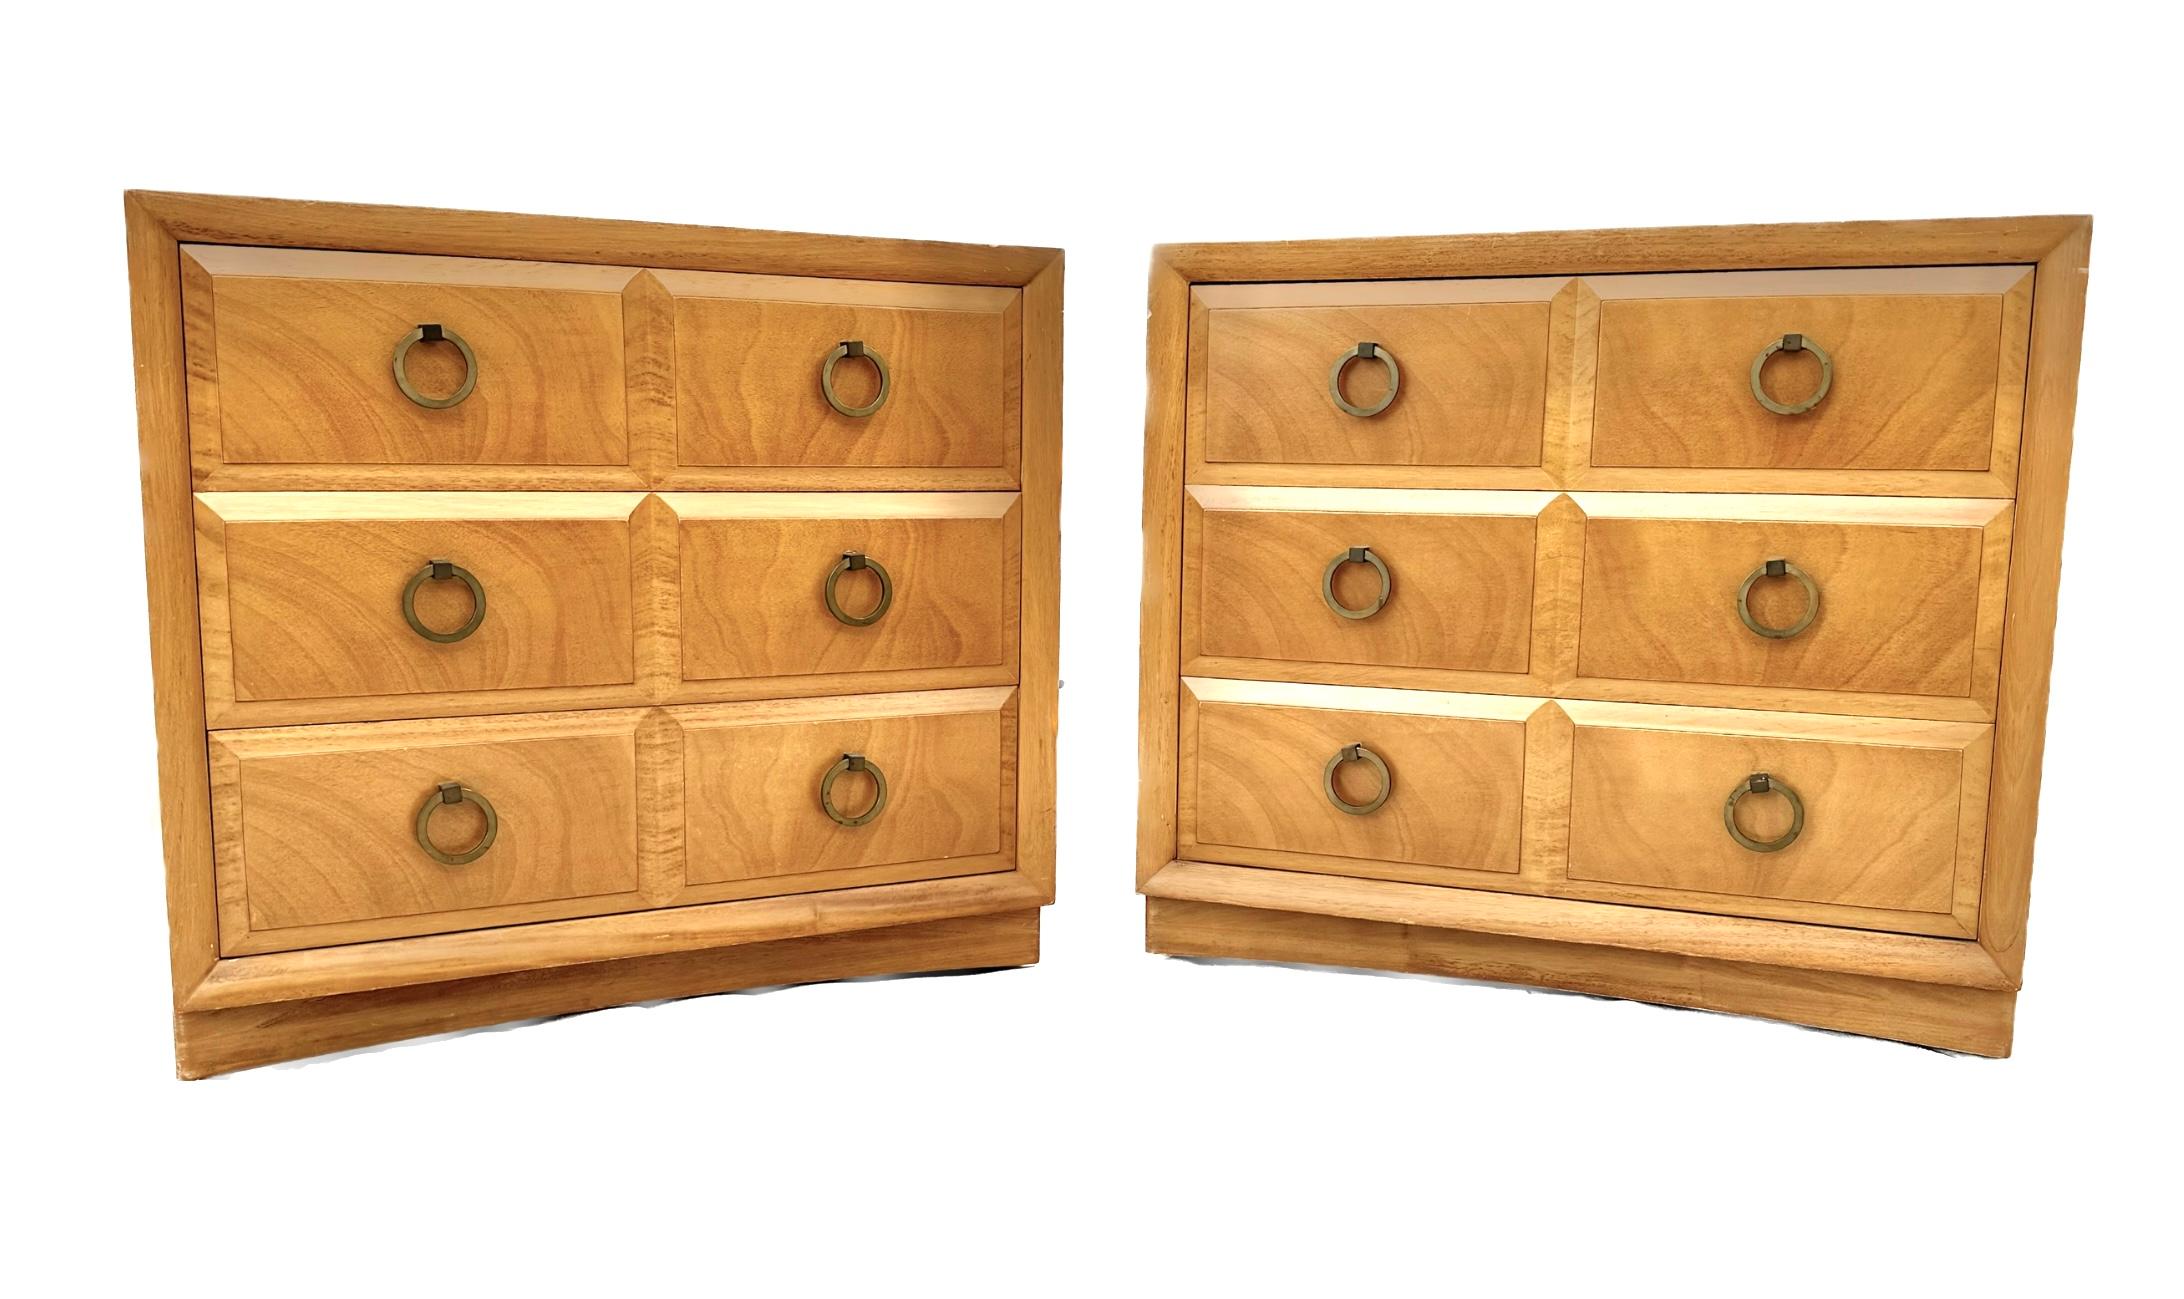 Stunning pair of mid-century three-drawer bedside tables / chests in walnut by T.H. Robsjohn-Gibbings for Widdicomb. Beveled drawer fronts with brass ring pulls, dovetail joinery, and Widdicomb label affixed inside top drawer. Iconic American mid